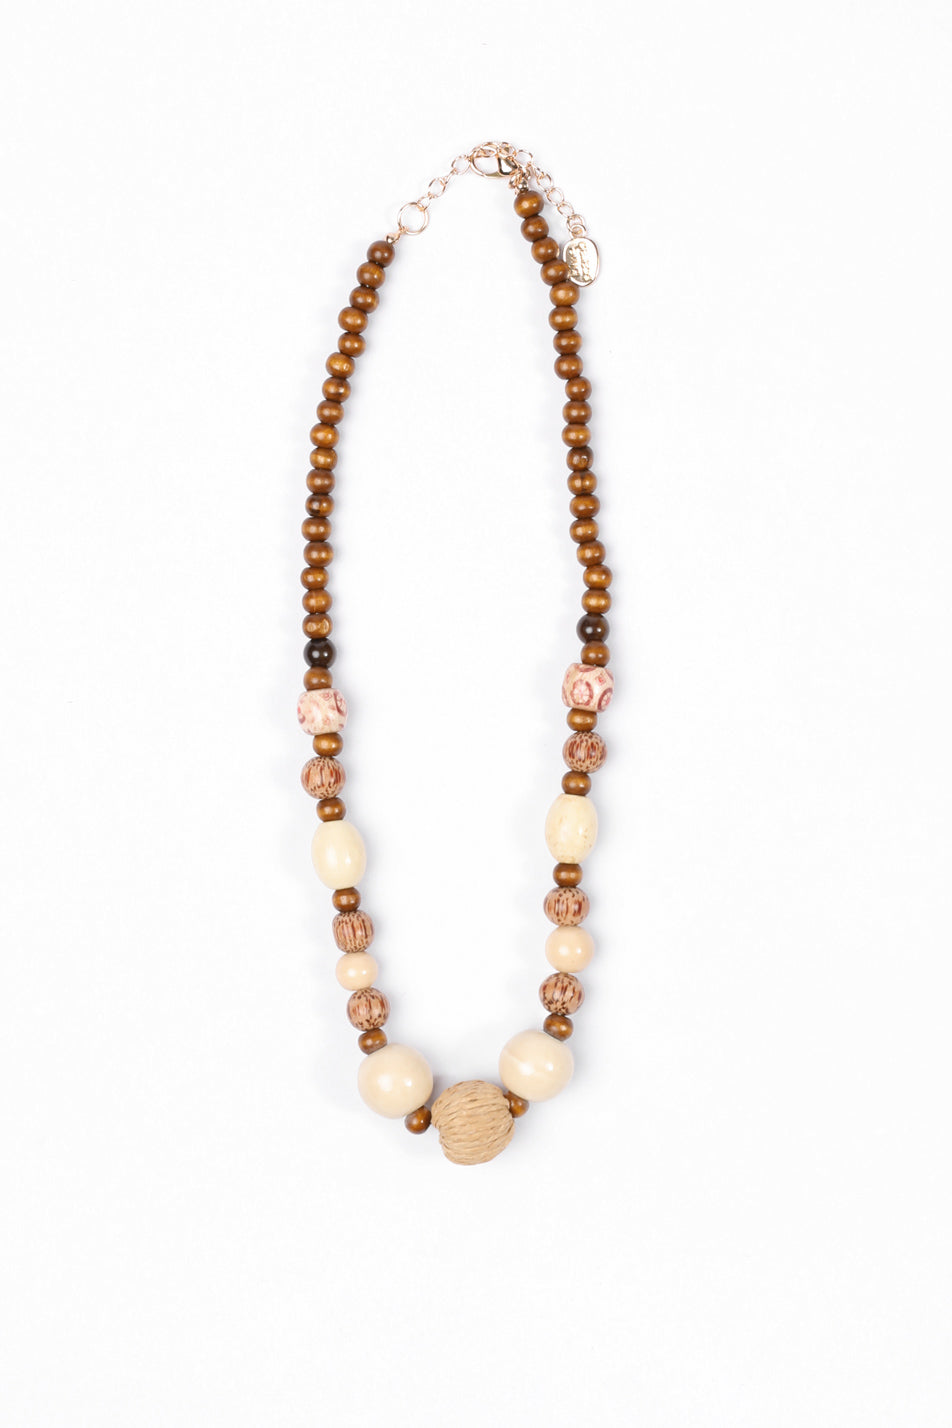 TEXTURED WOOD BEAD SHORT NECKLACE